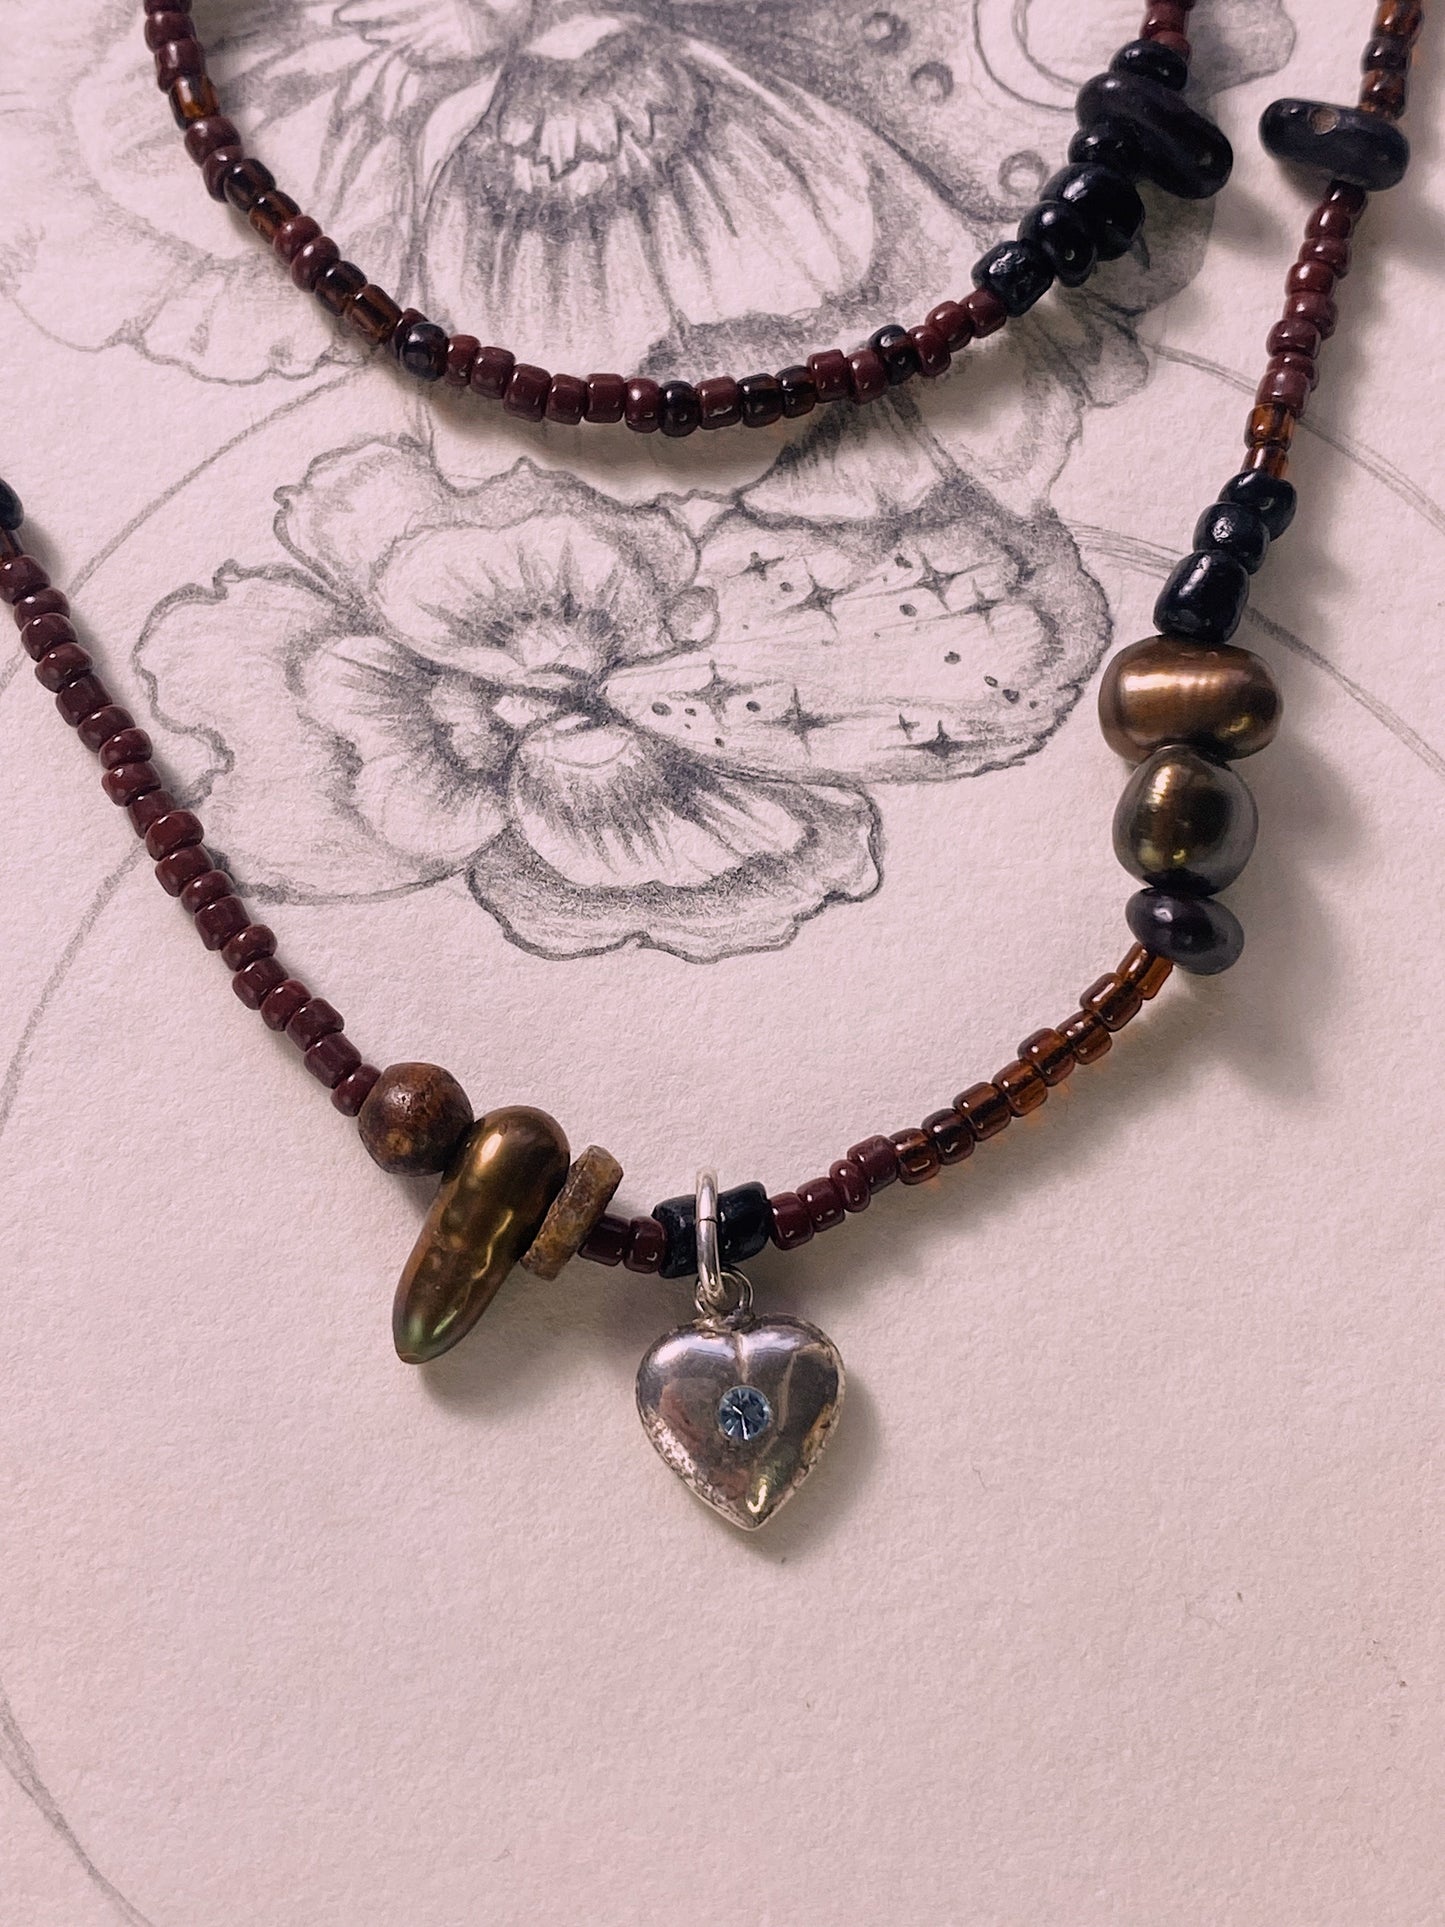 beaded vintage heart charm with blue stone